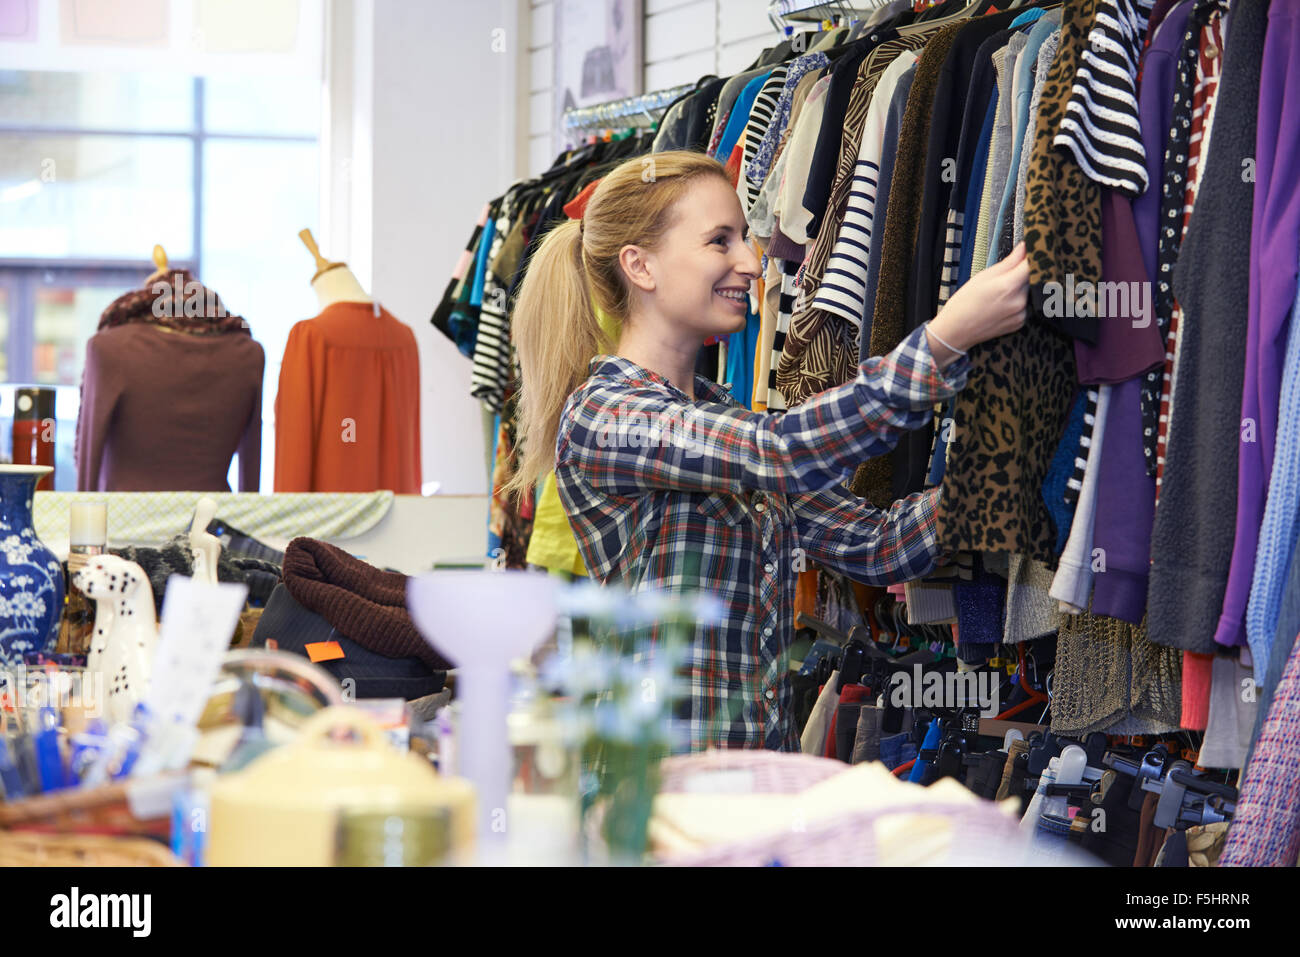 Female Shopper In Thrift Store Looking At Clothes Stock Photo